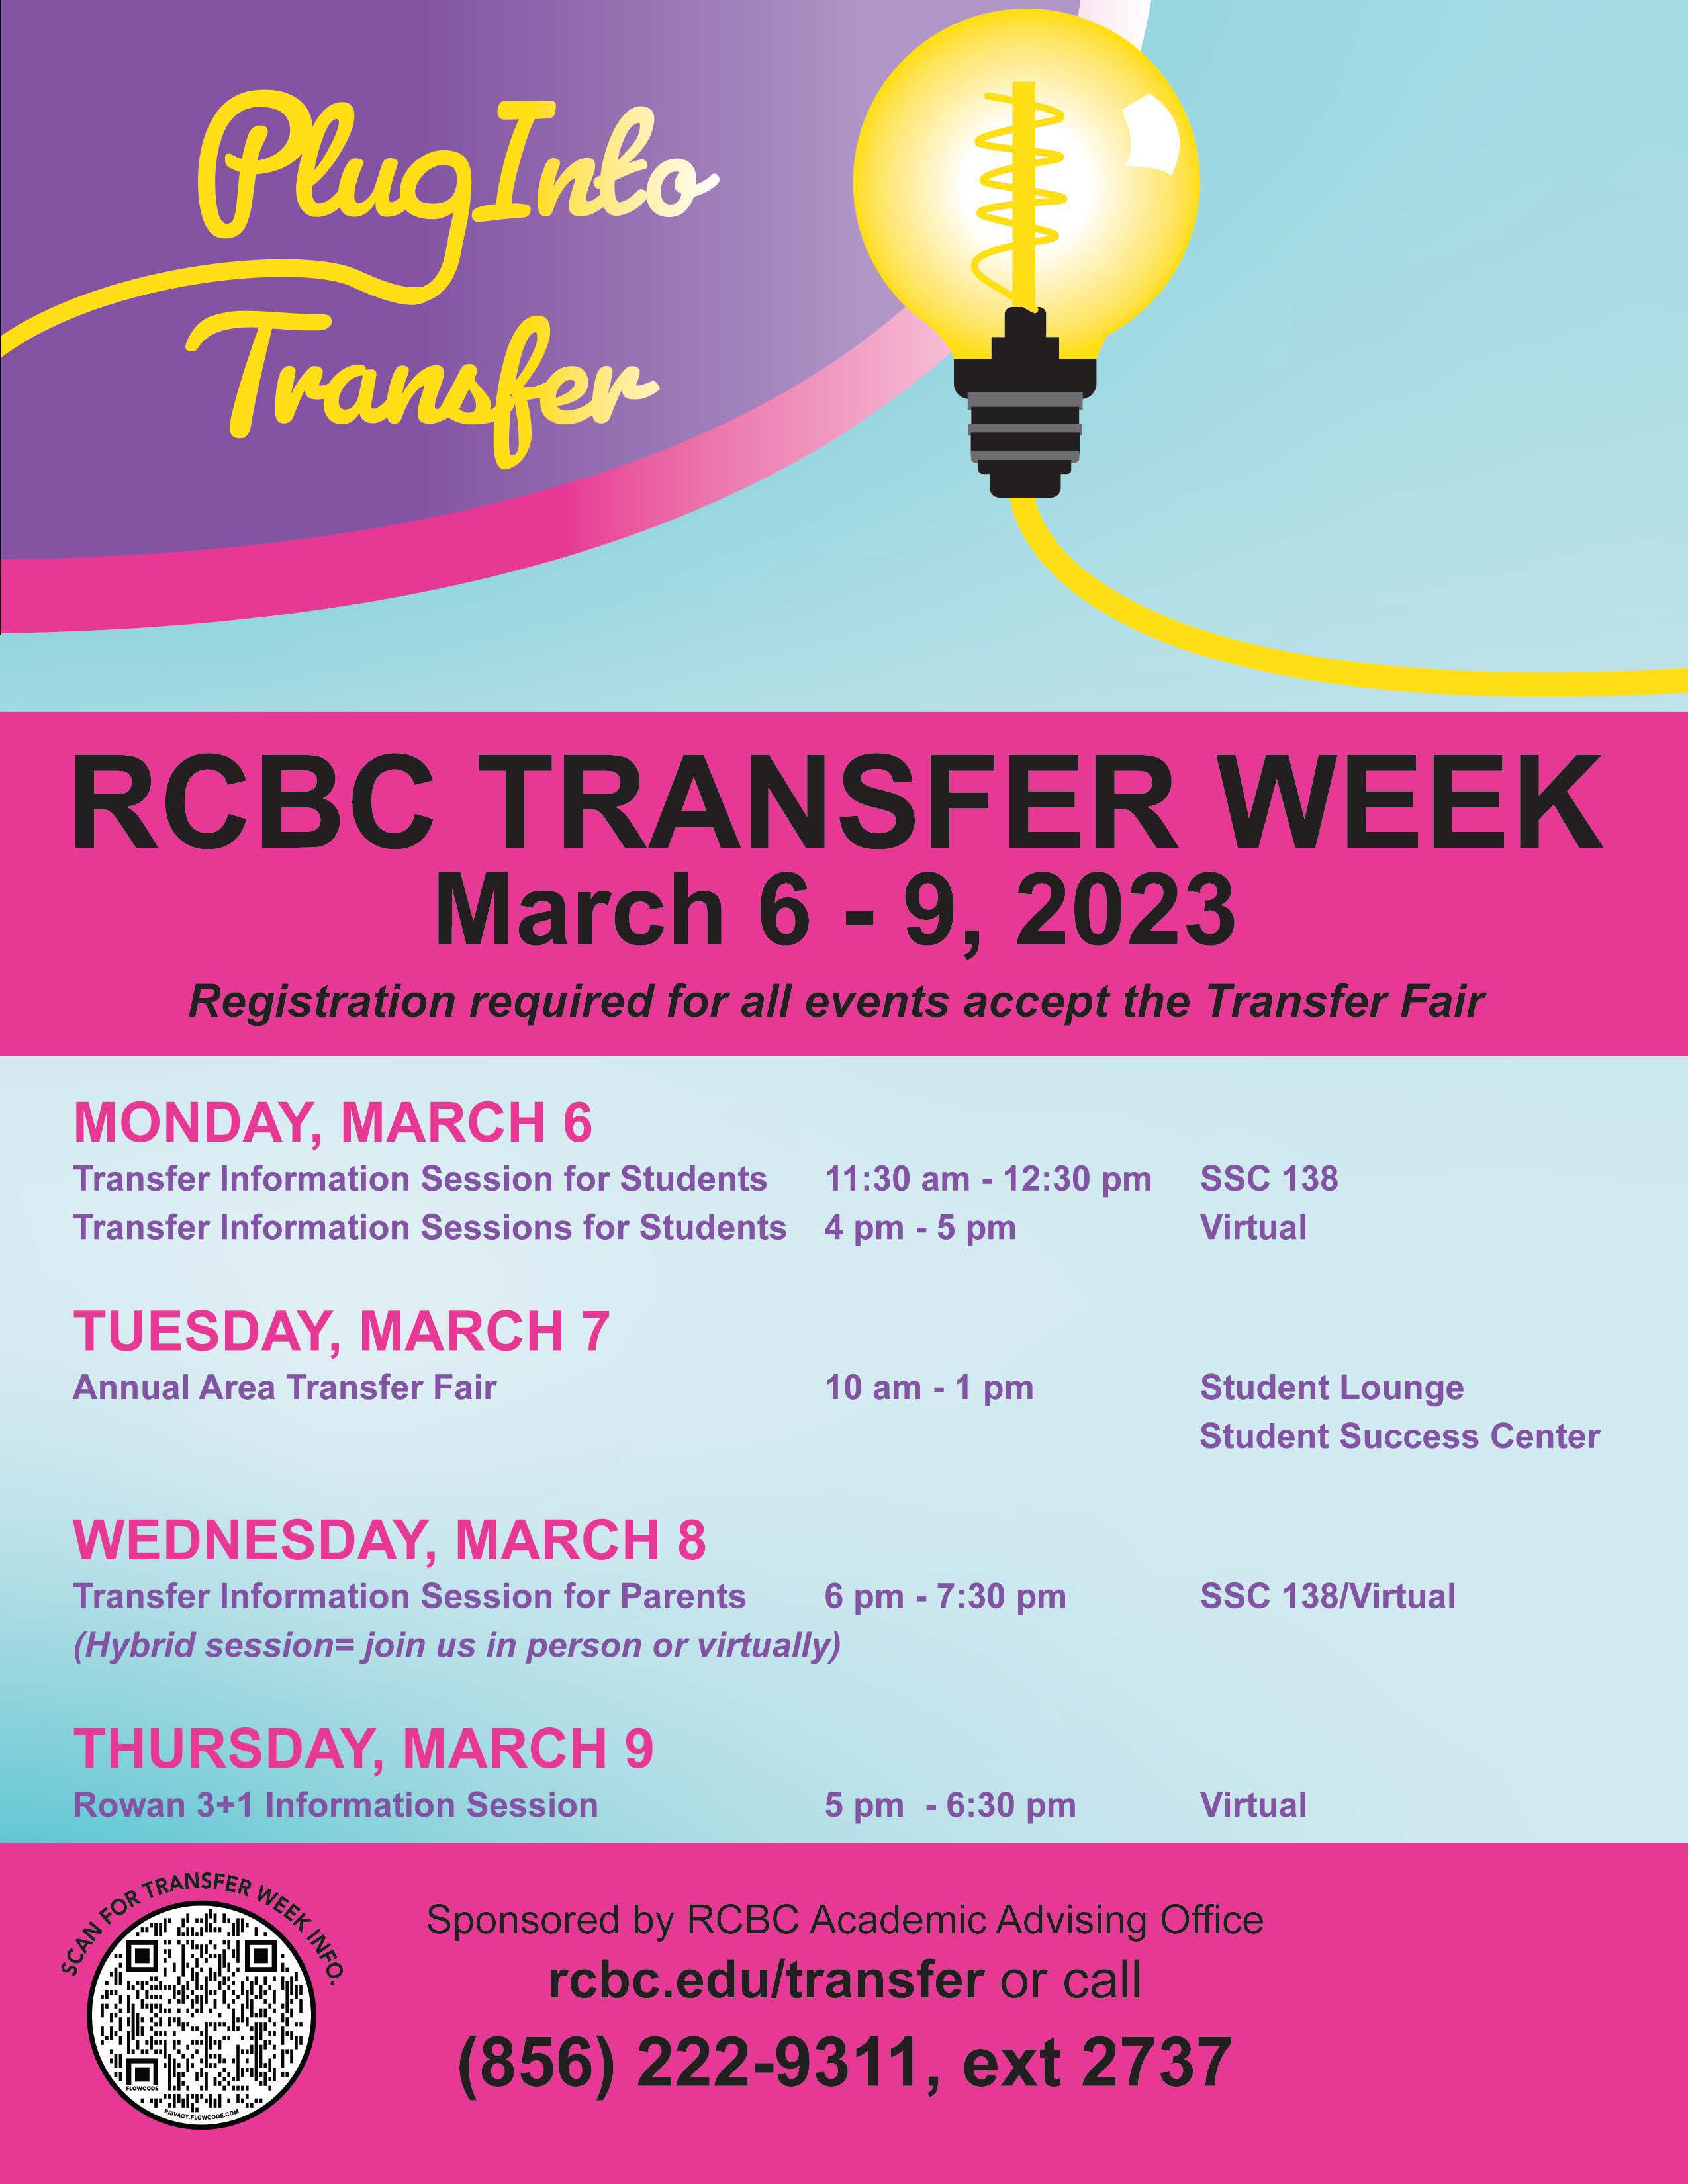 RCBC Transfer Week Flyer with Date and Time details